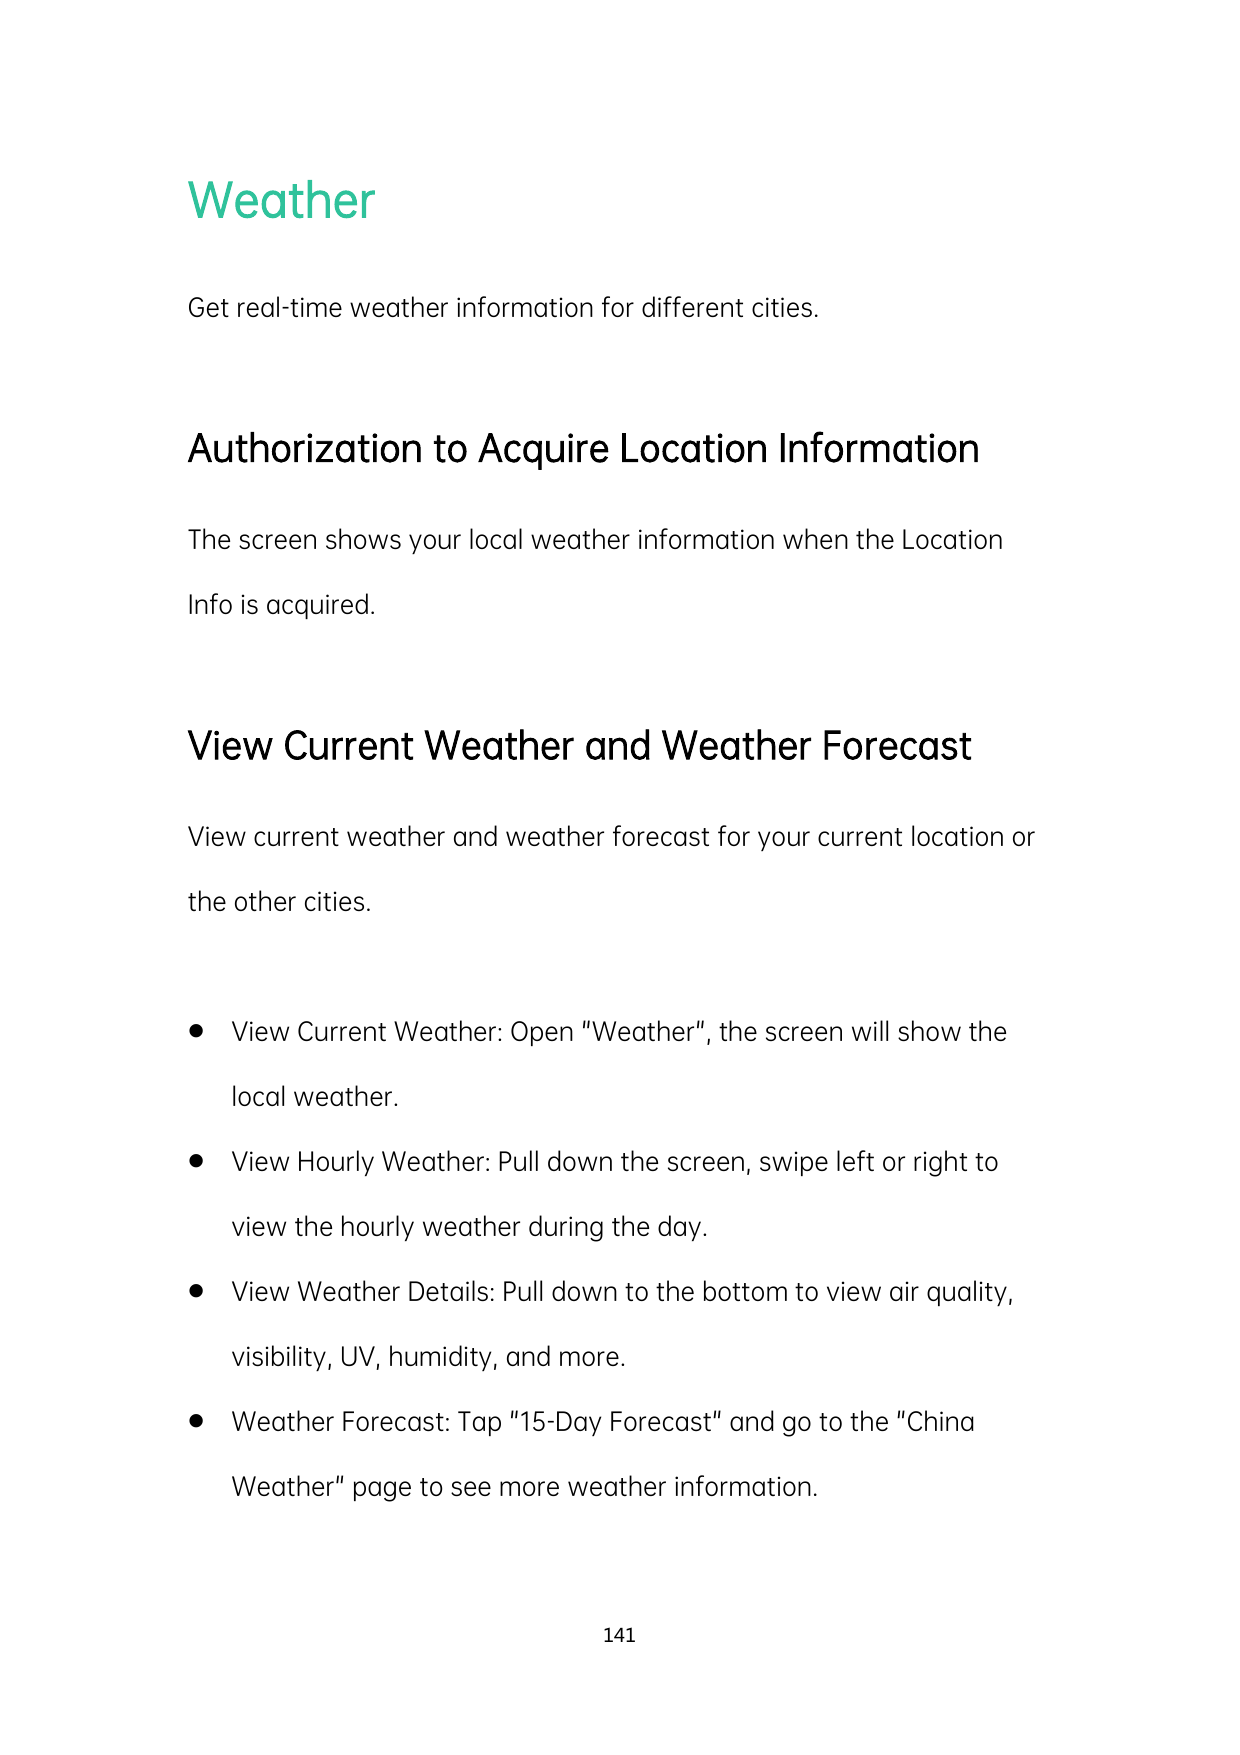 WeatherGet real-time weather information for different cities.Authorization to Acquire Location InformationThe screen shows your